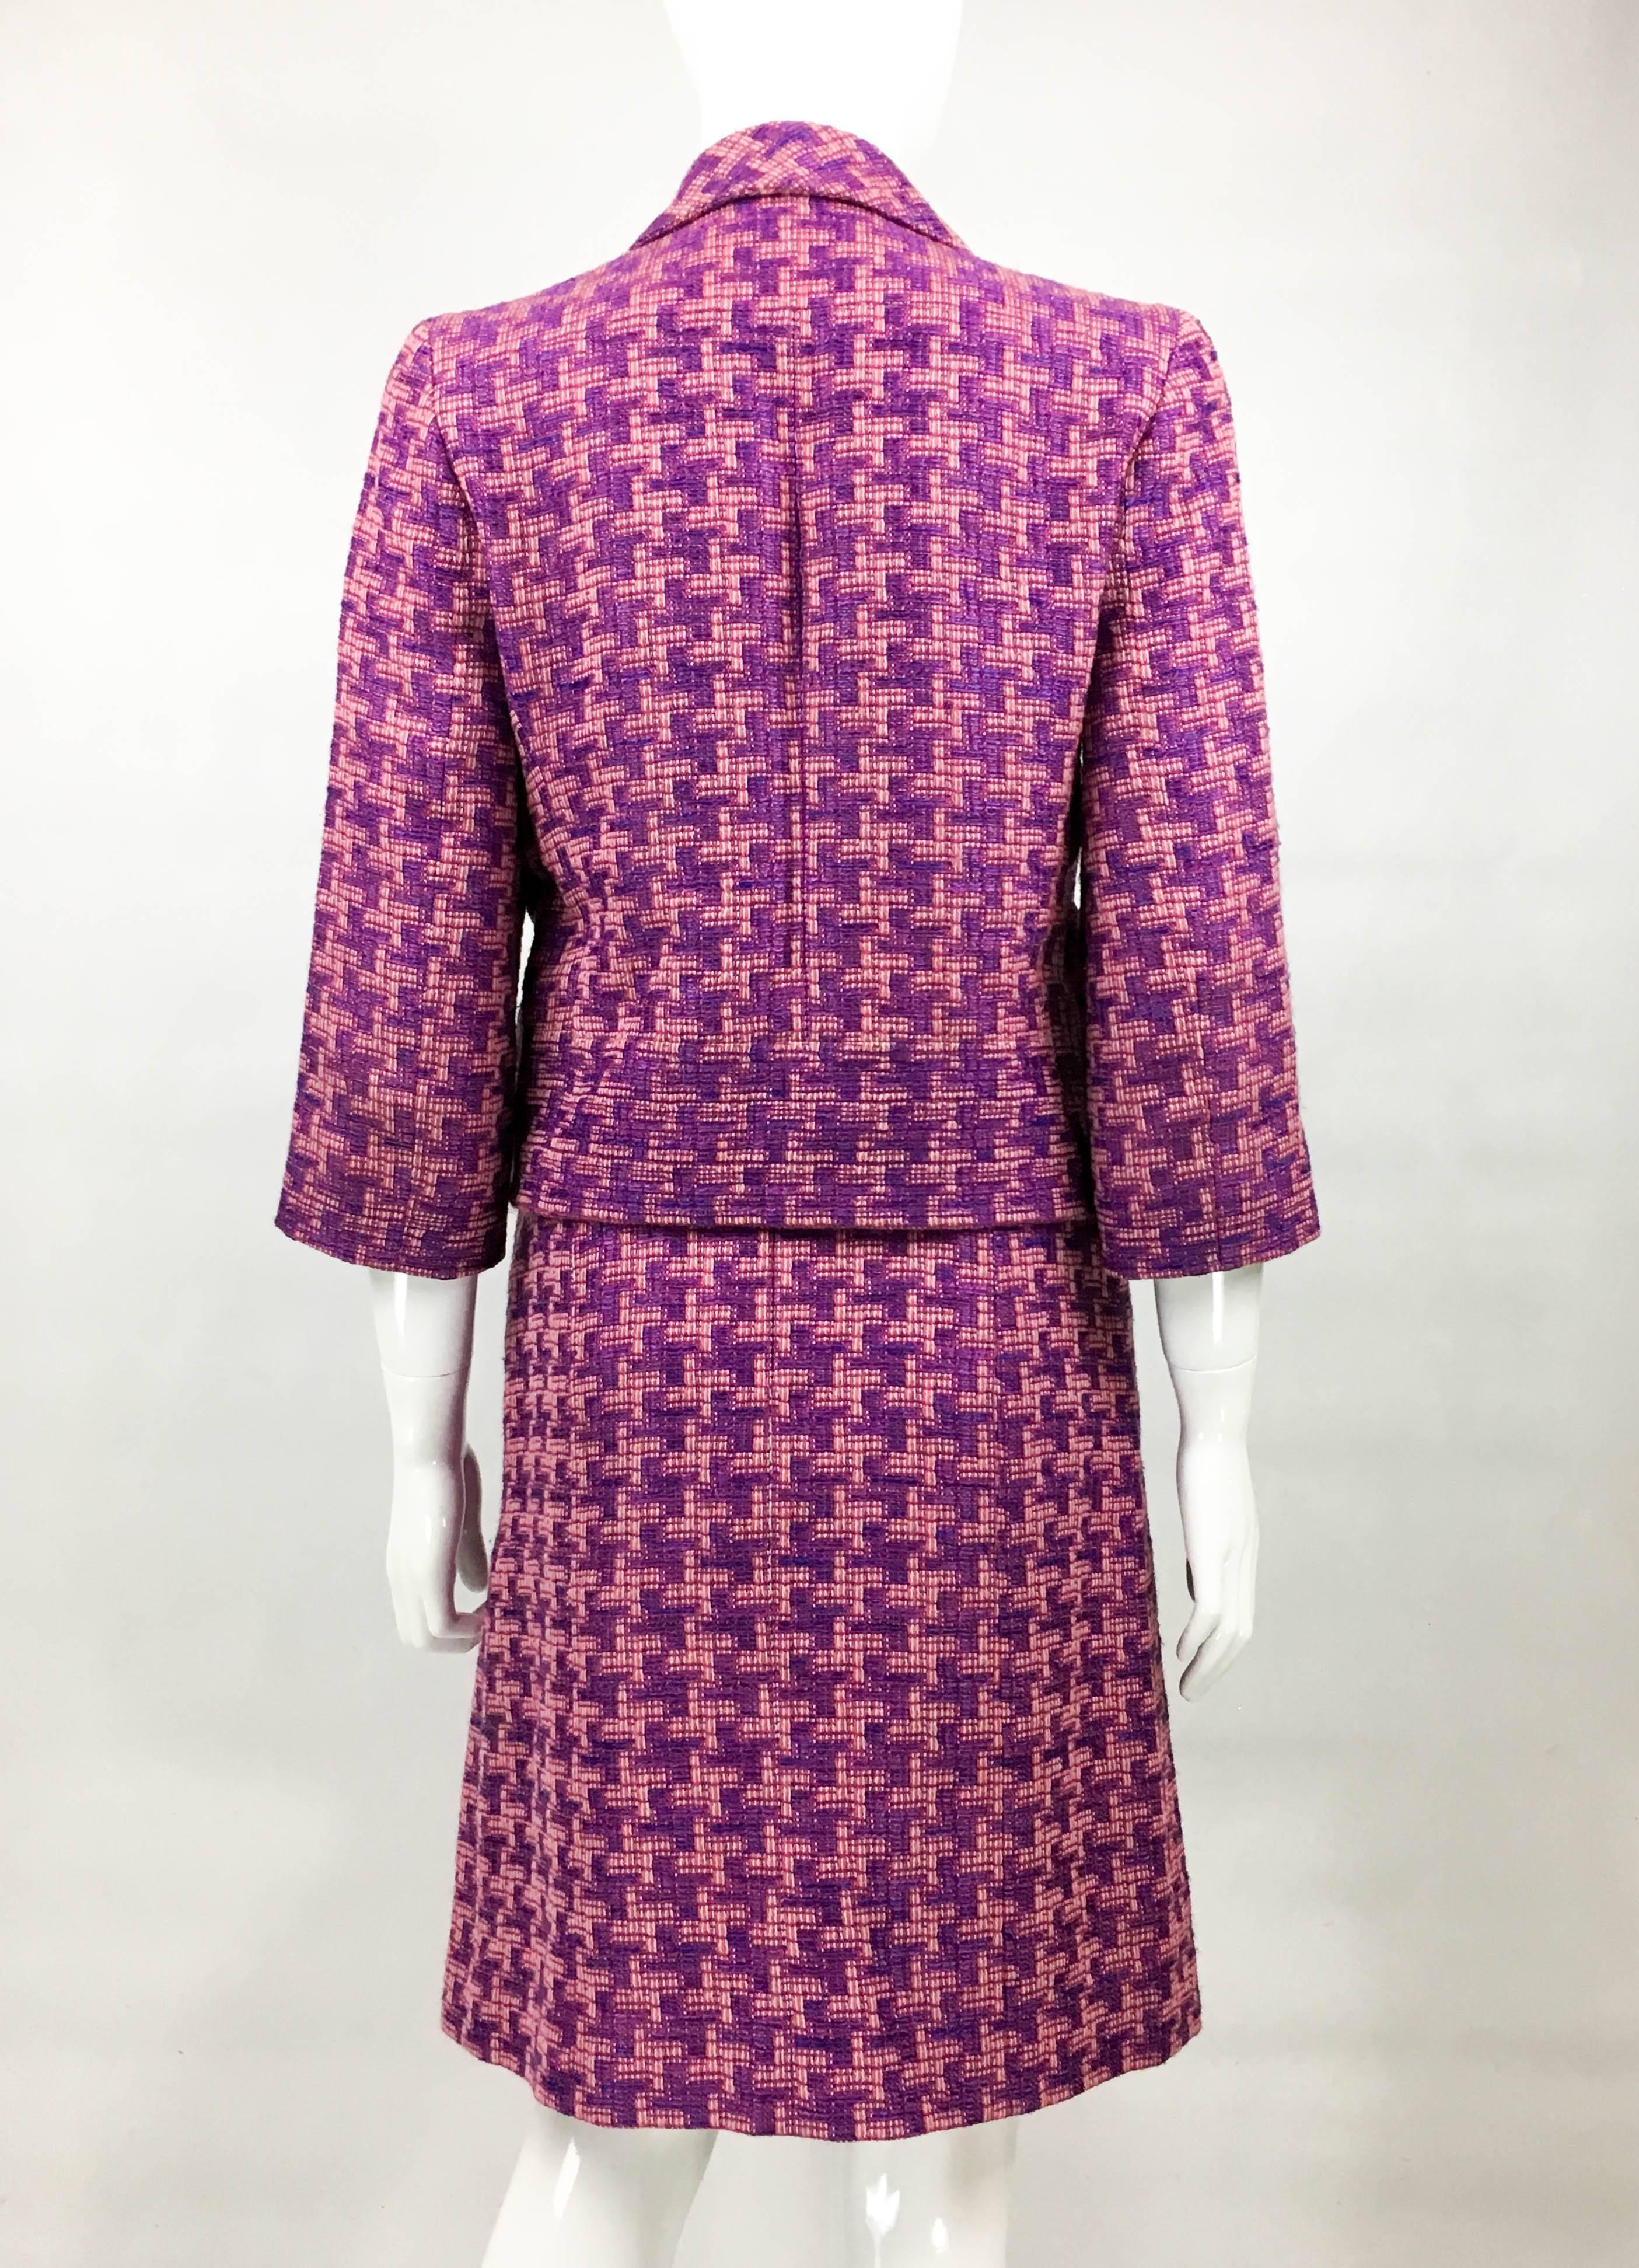 2001 Chanel Pink and Purple Wool Bouclé Skirt Suit For Sale 1